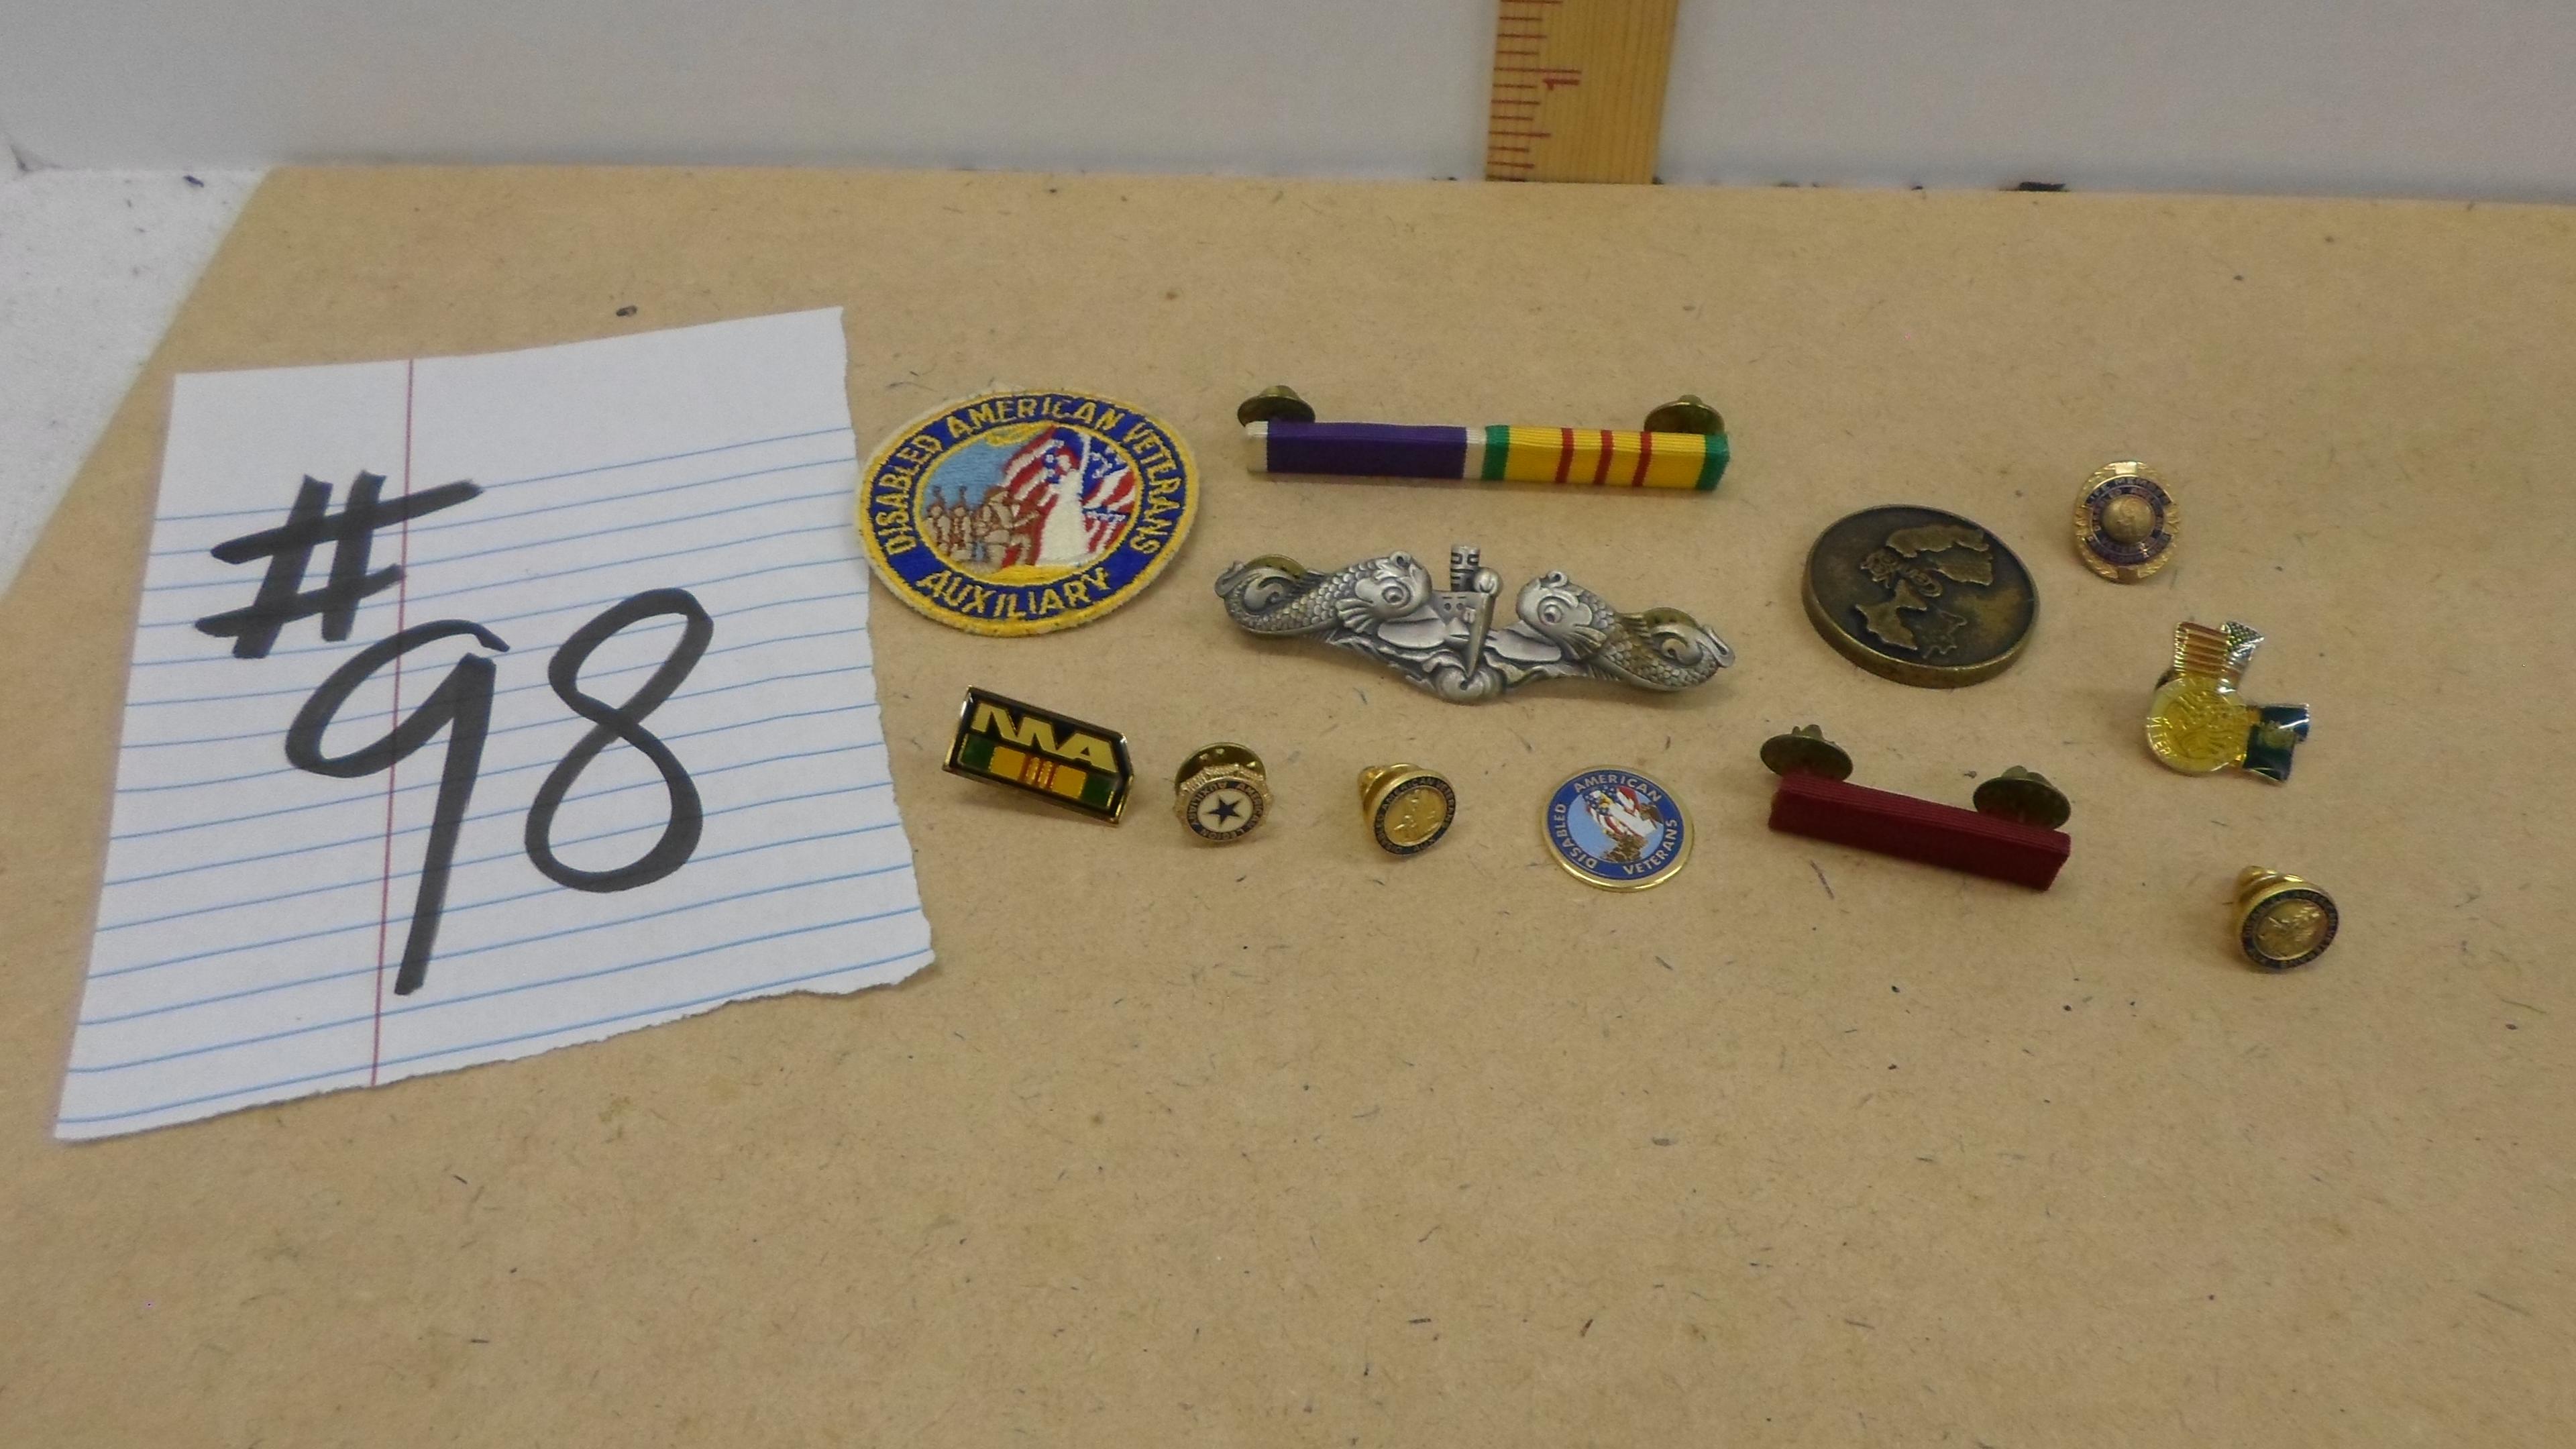 military pins and medals, vintage pins and medals from the US army and navy